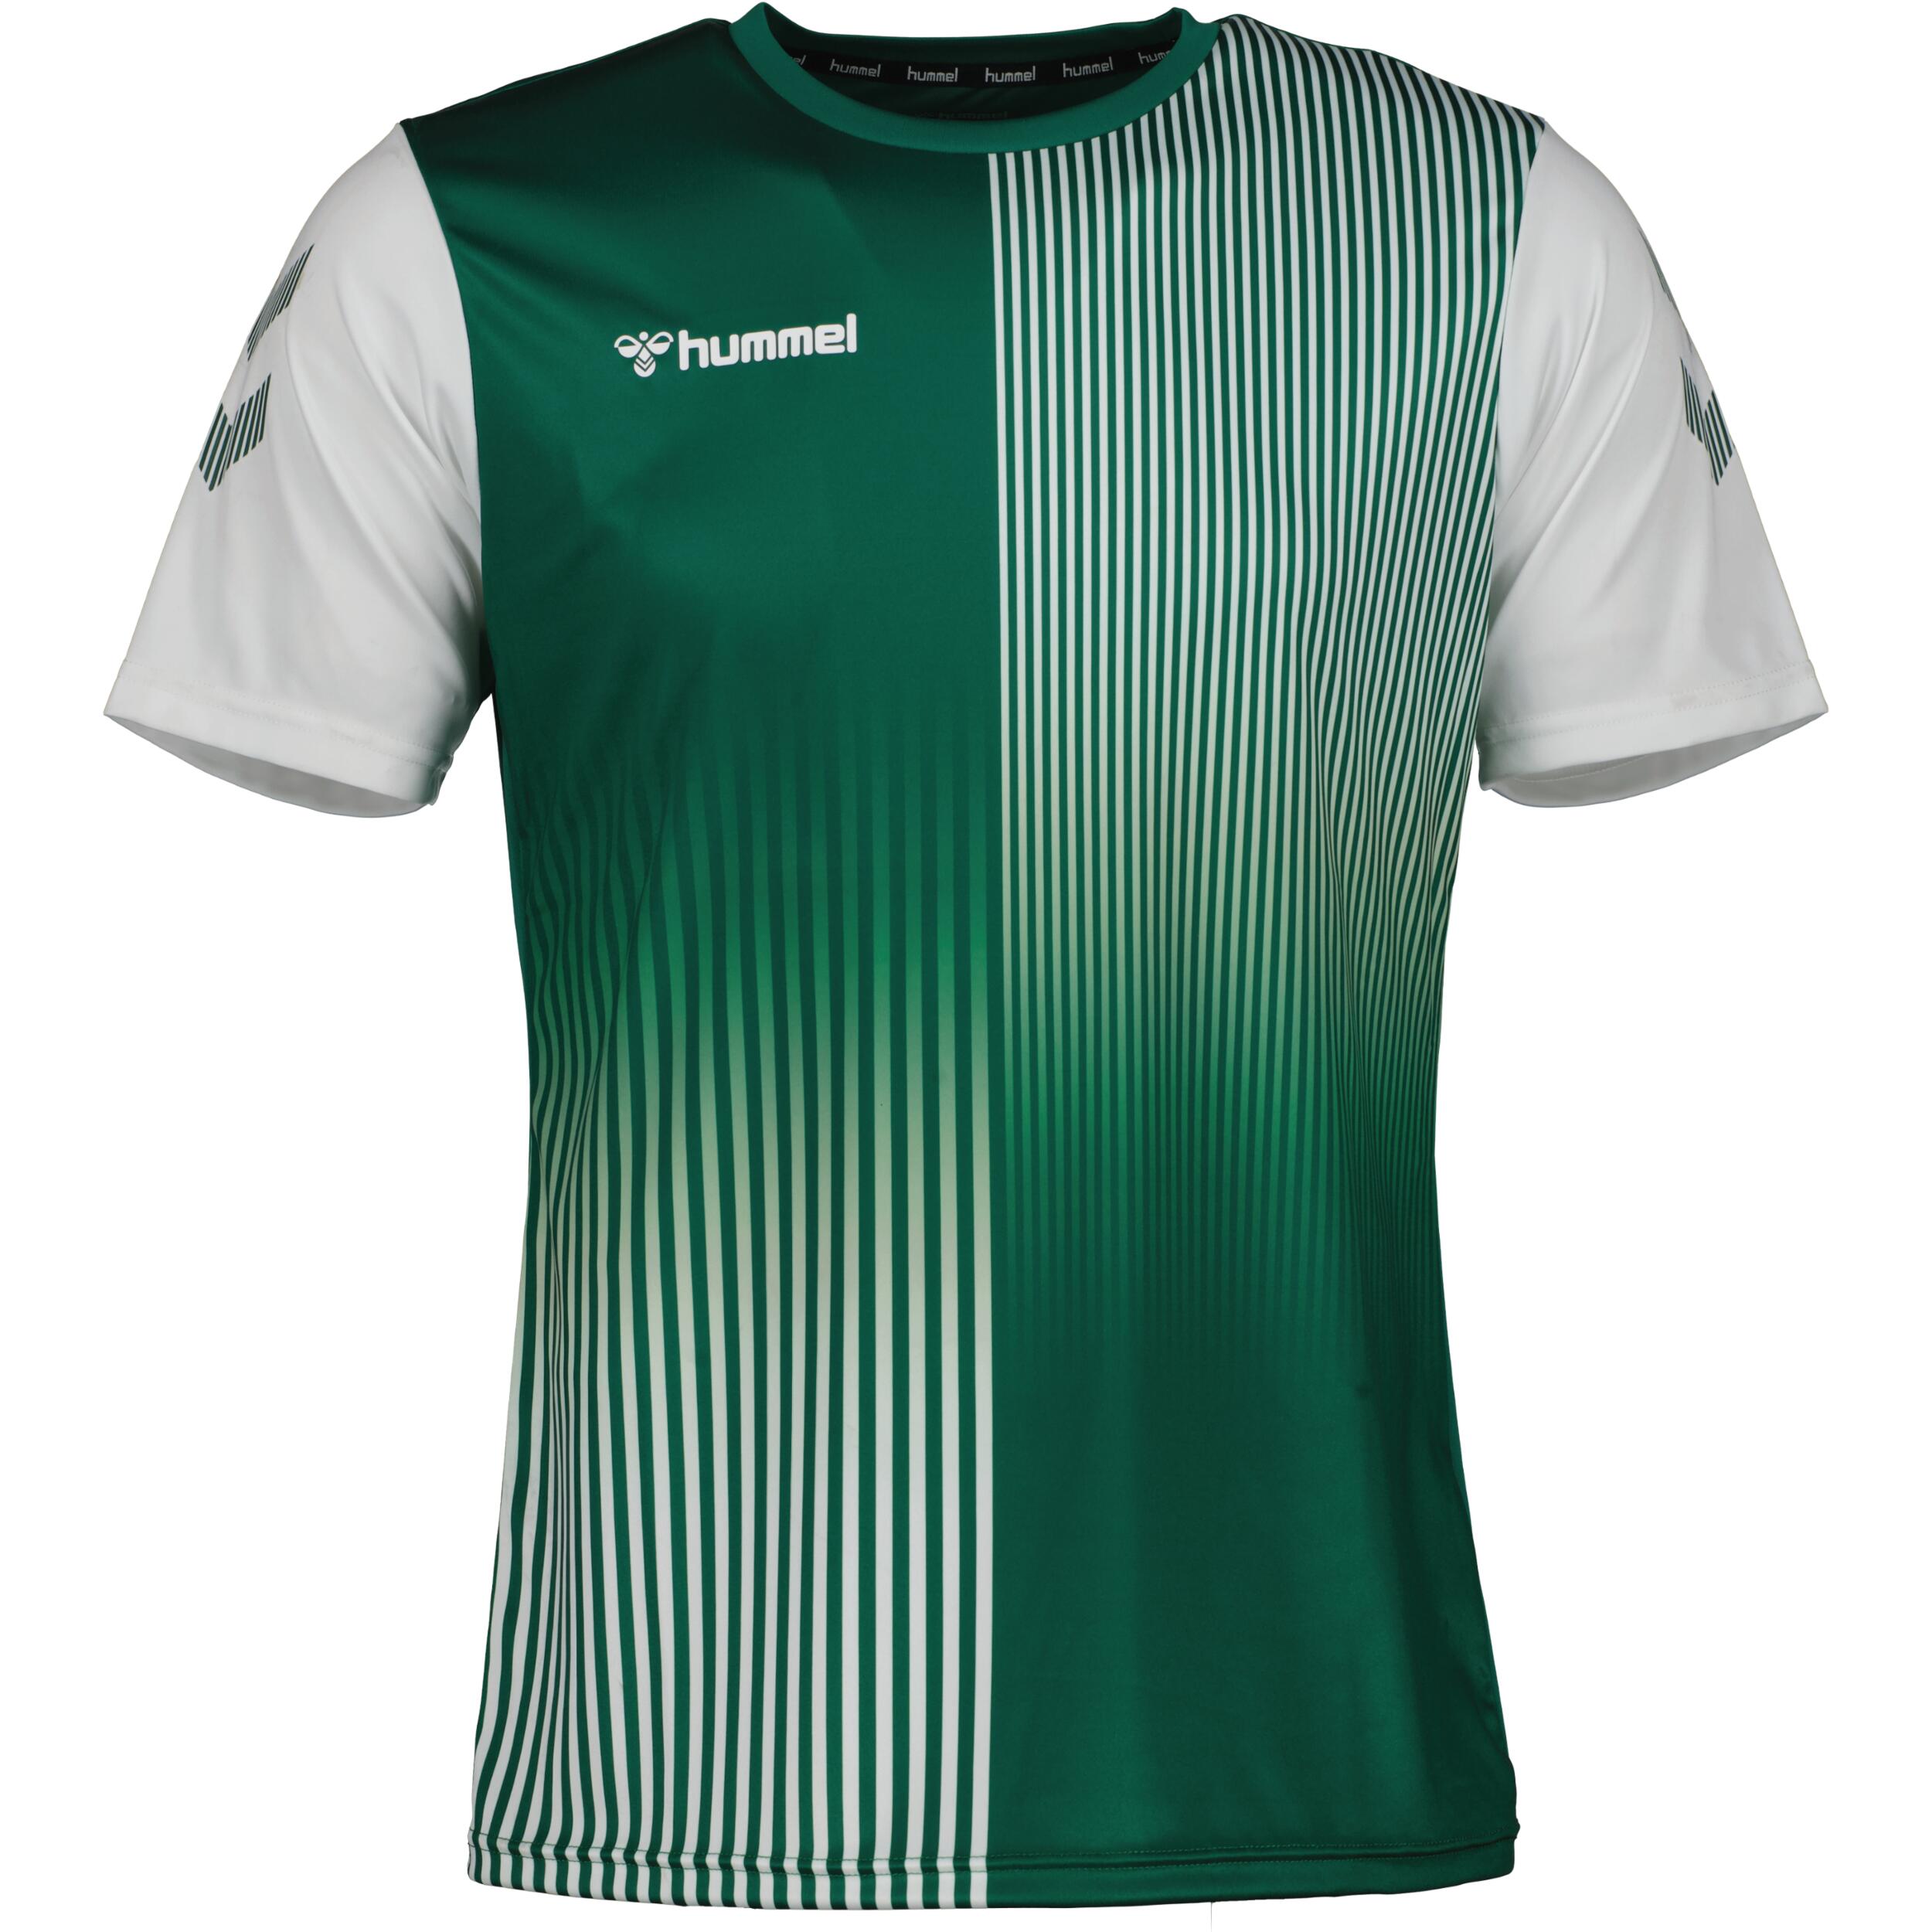 HUMMEL Mexico jersey for men, great for football, in evergreen/white